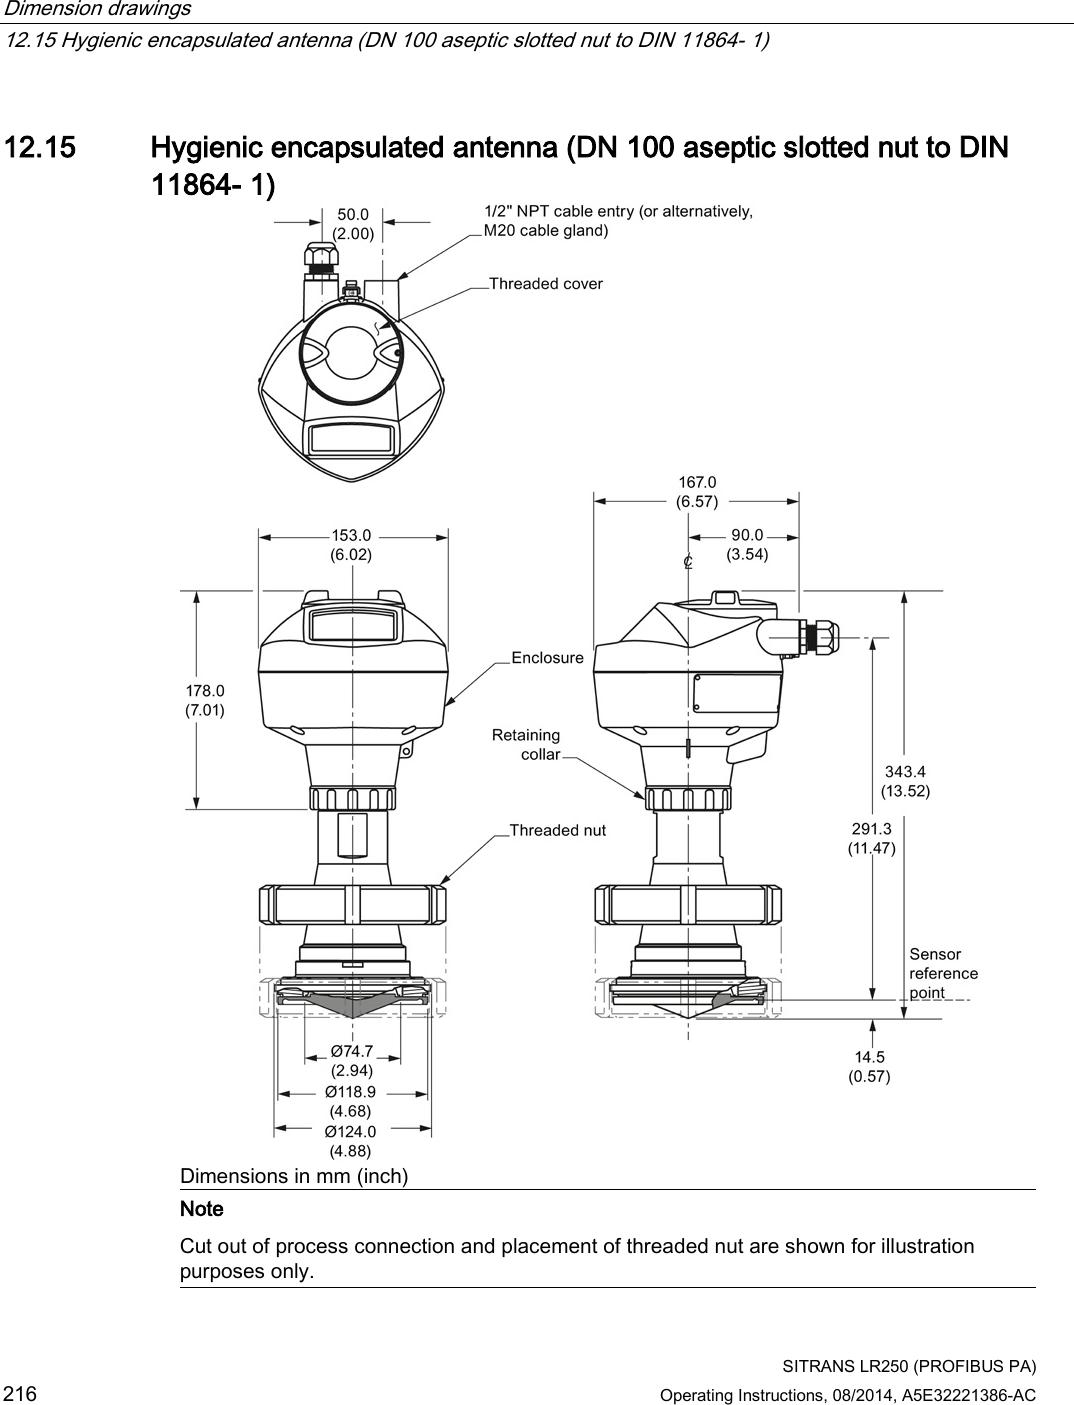 Dimension drawings   12.15 Hygienic encapsulated antenna (DN 100 aseptic slotted nut to DIN 11864- 1)  SITRANS LR250 (PROFIBUS PA) 216 Operating Instructions, 08/2014, A5E32221386-AC  12.15 Hygienic encapsulated antenna (DN 100 aseptic slotted nut to DIN 11864- 1)  Dimensions in mm (inch)  Note Cut out of process connection and placement of threaded nut are shown for illustration purposes only.  